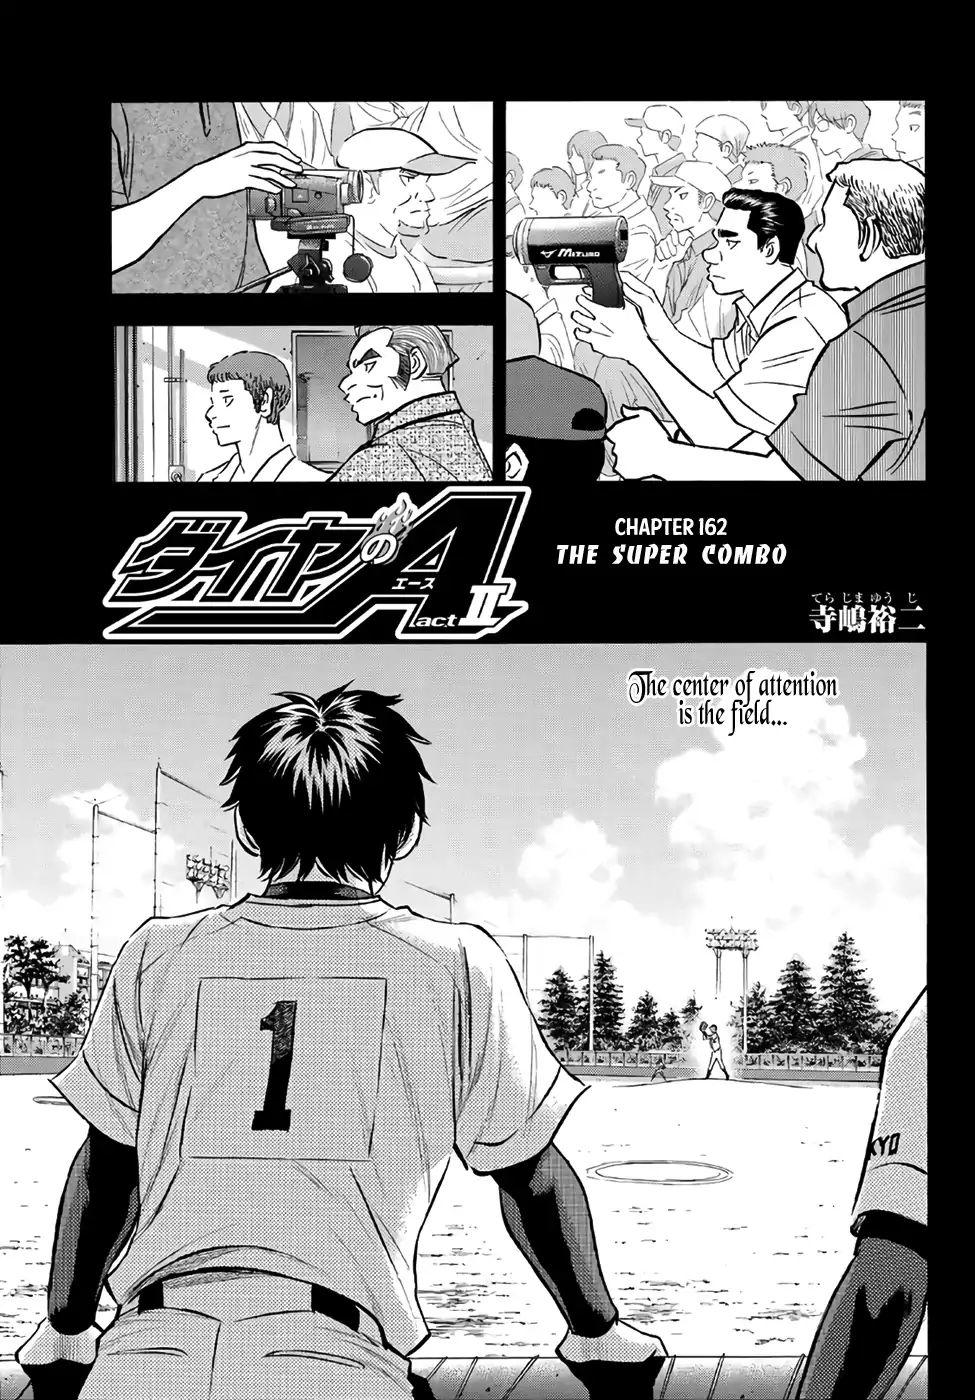 Read Daiya No A - Act Ii Chapter 169: The Focus Of The Gaze